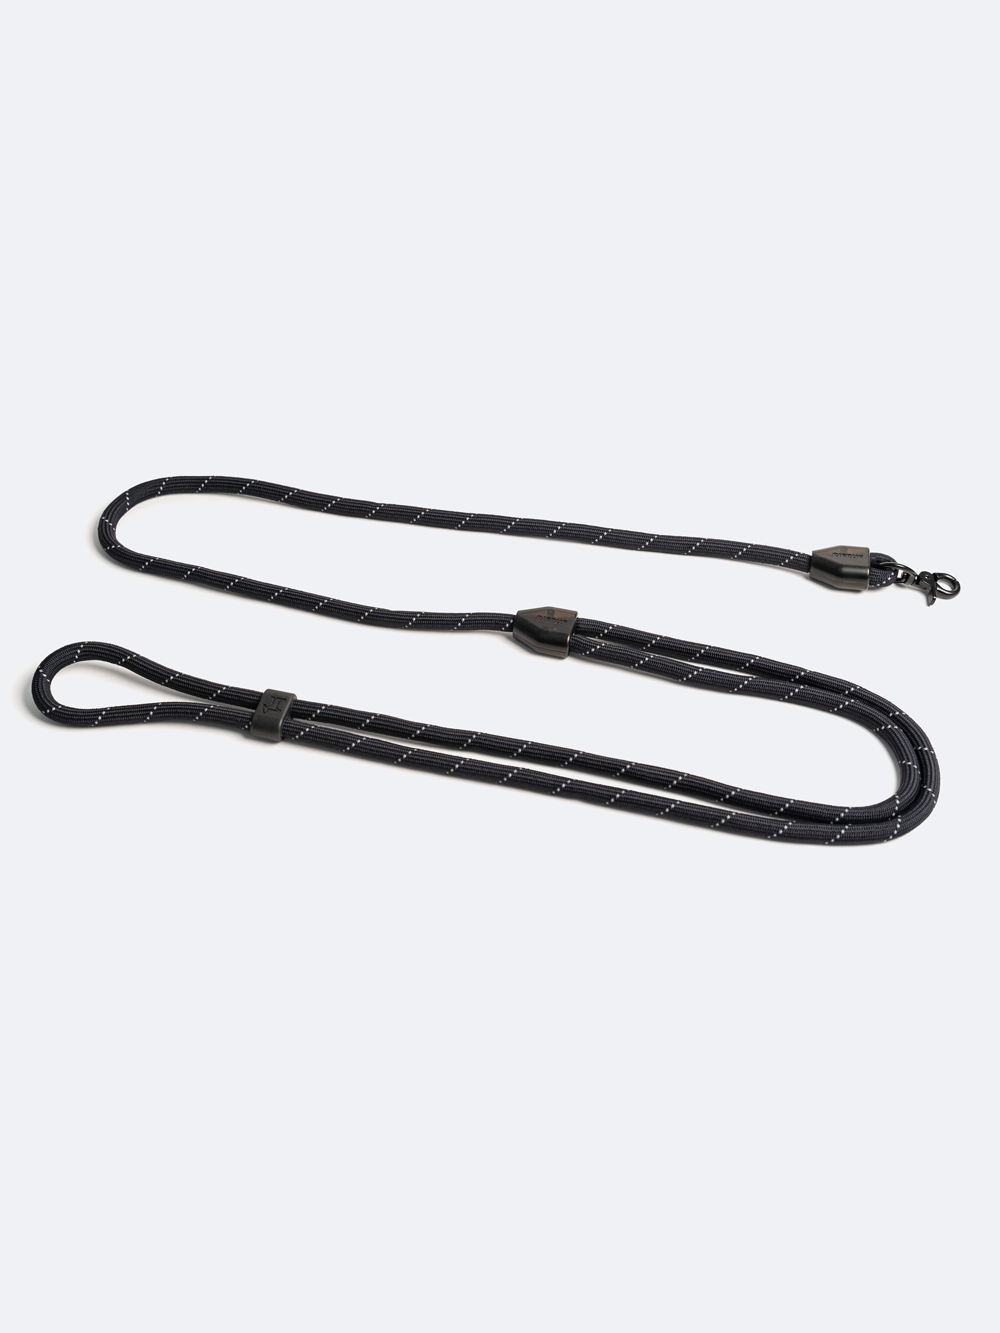 Commuter Harness and Leash Set